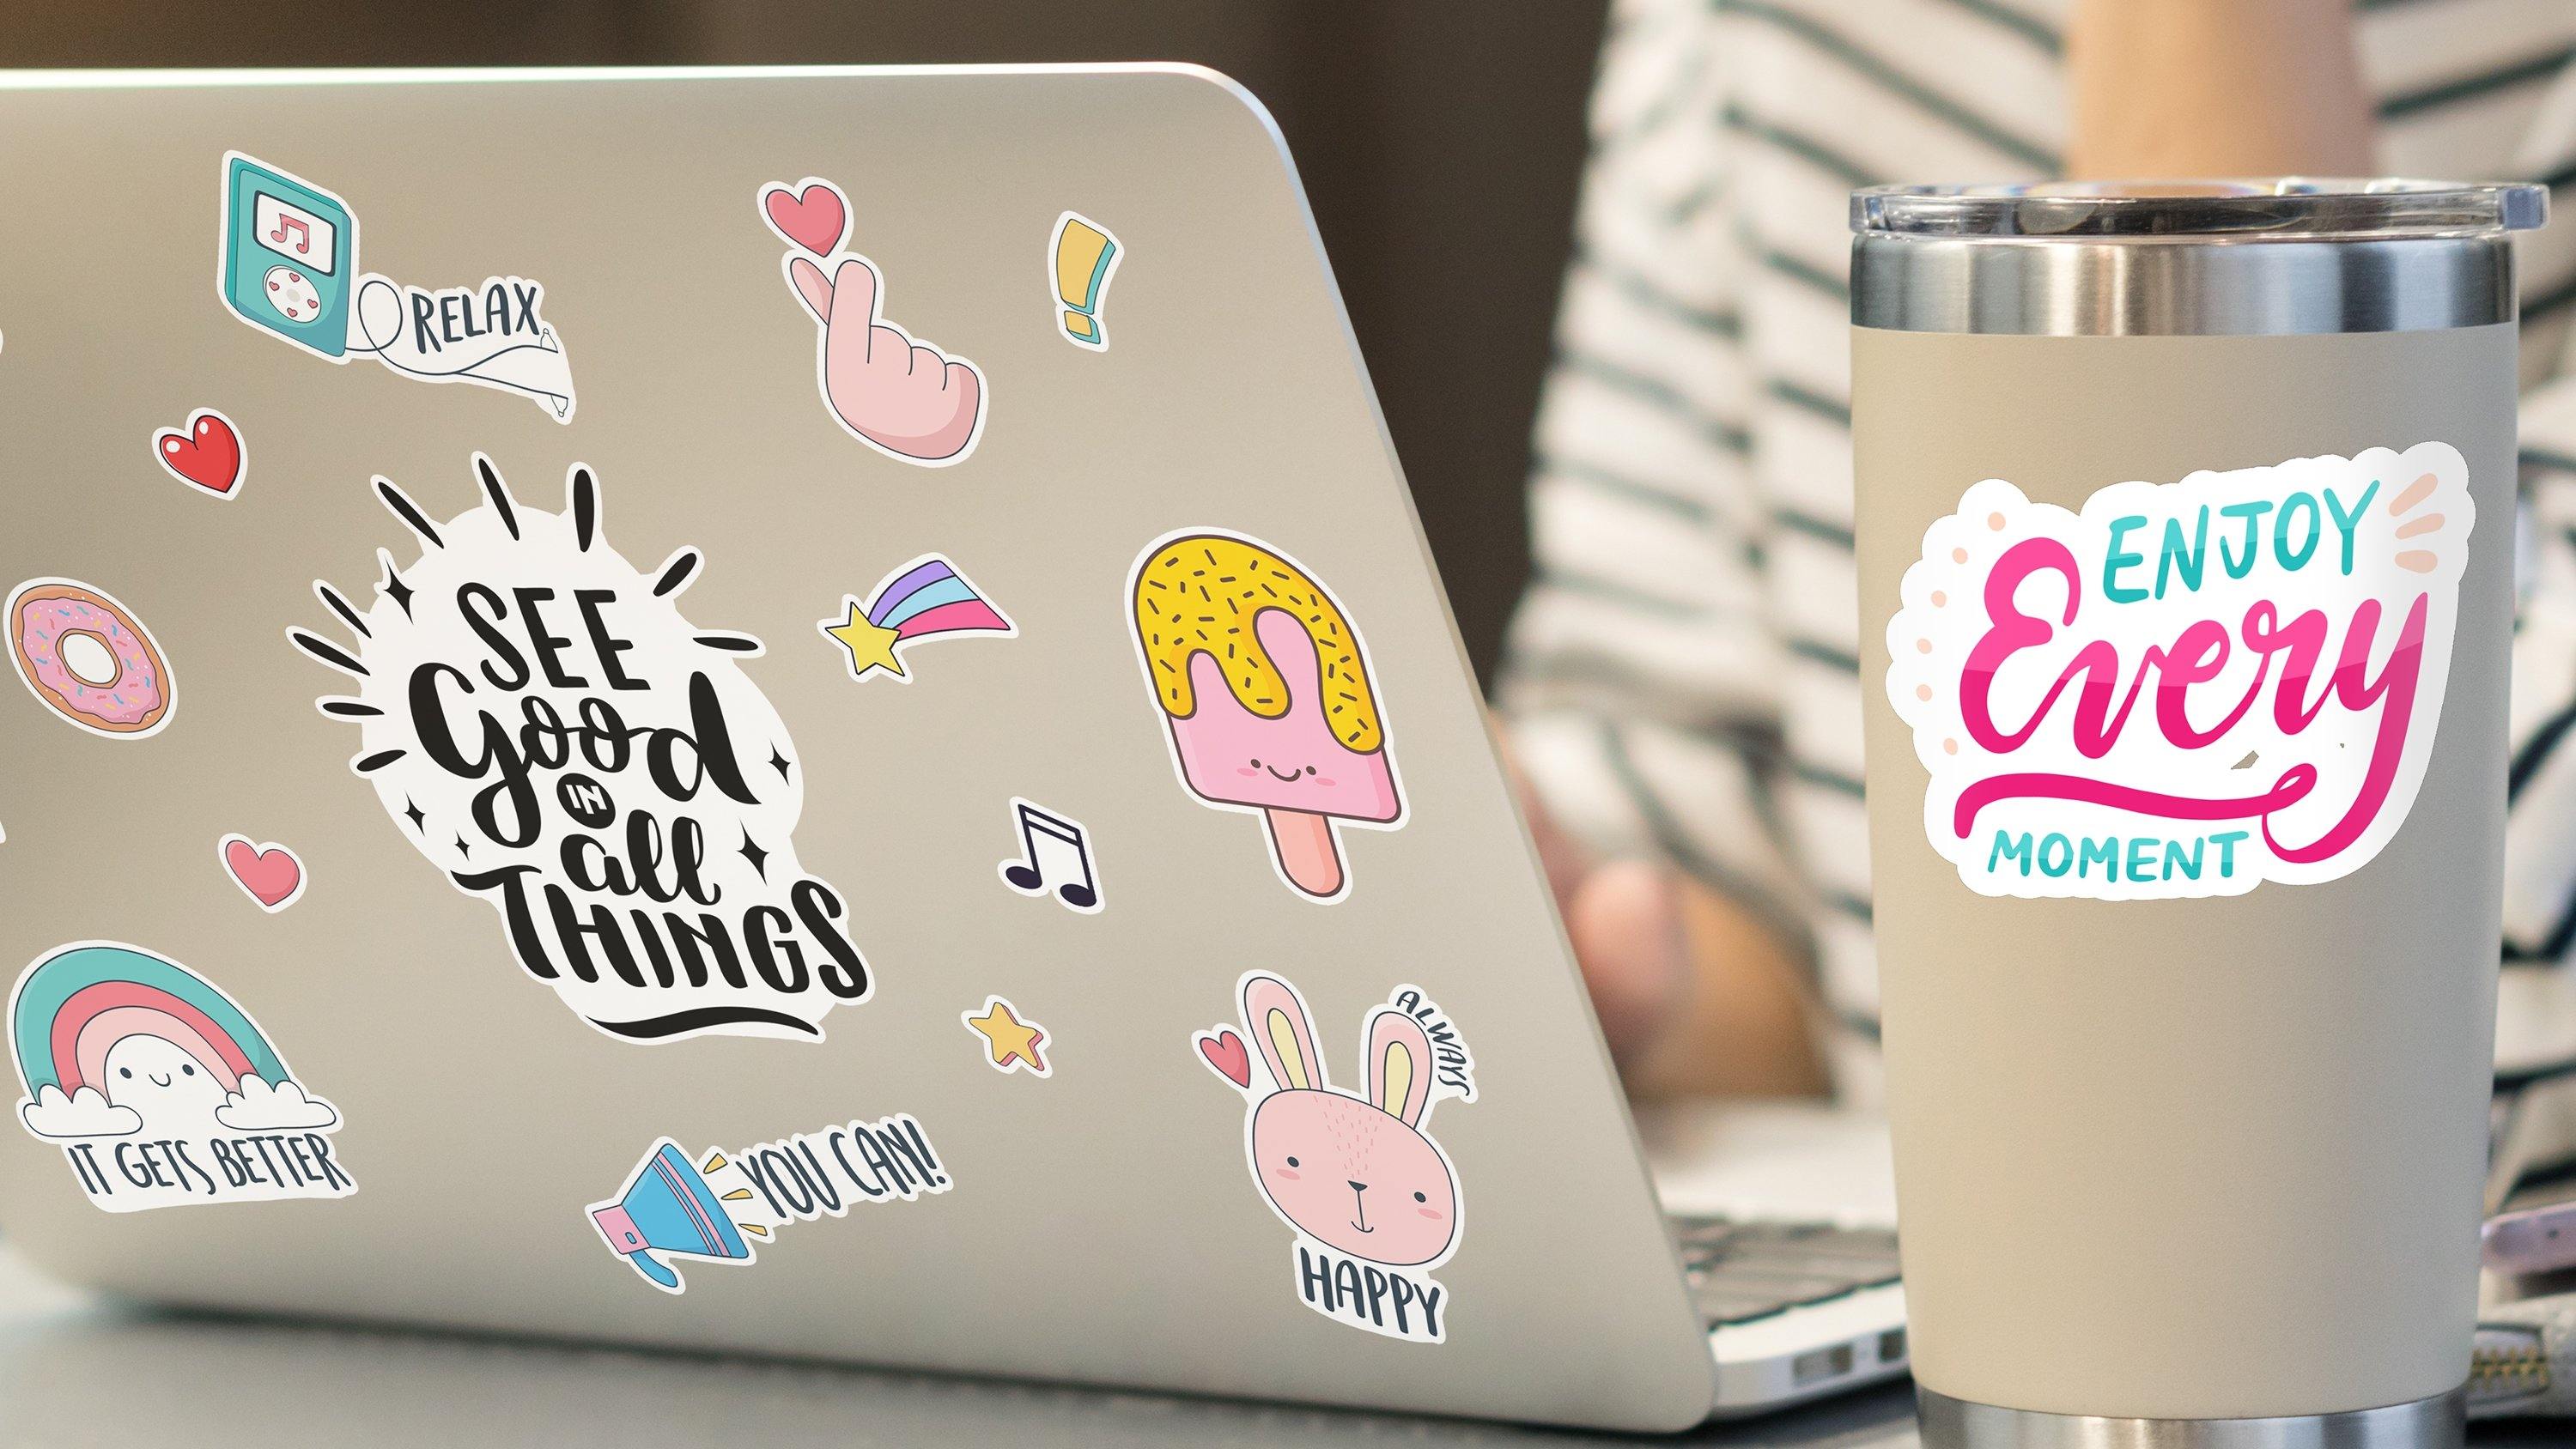 Choosing The Right Printable Sticker Paper For Your Business: PET vs. Vinyl